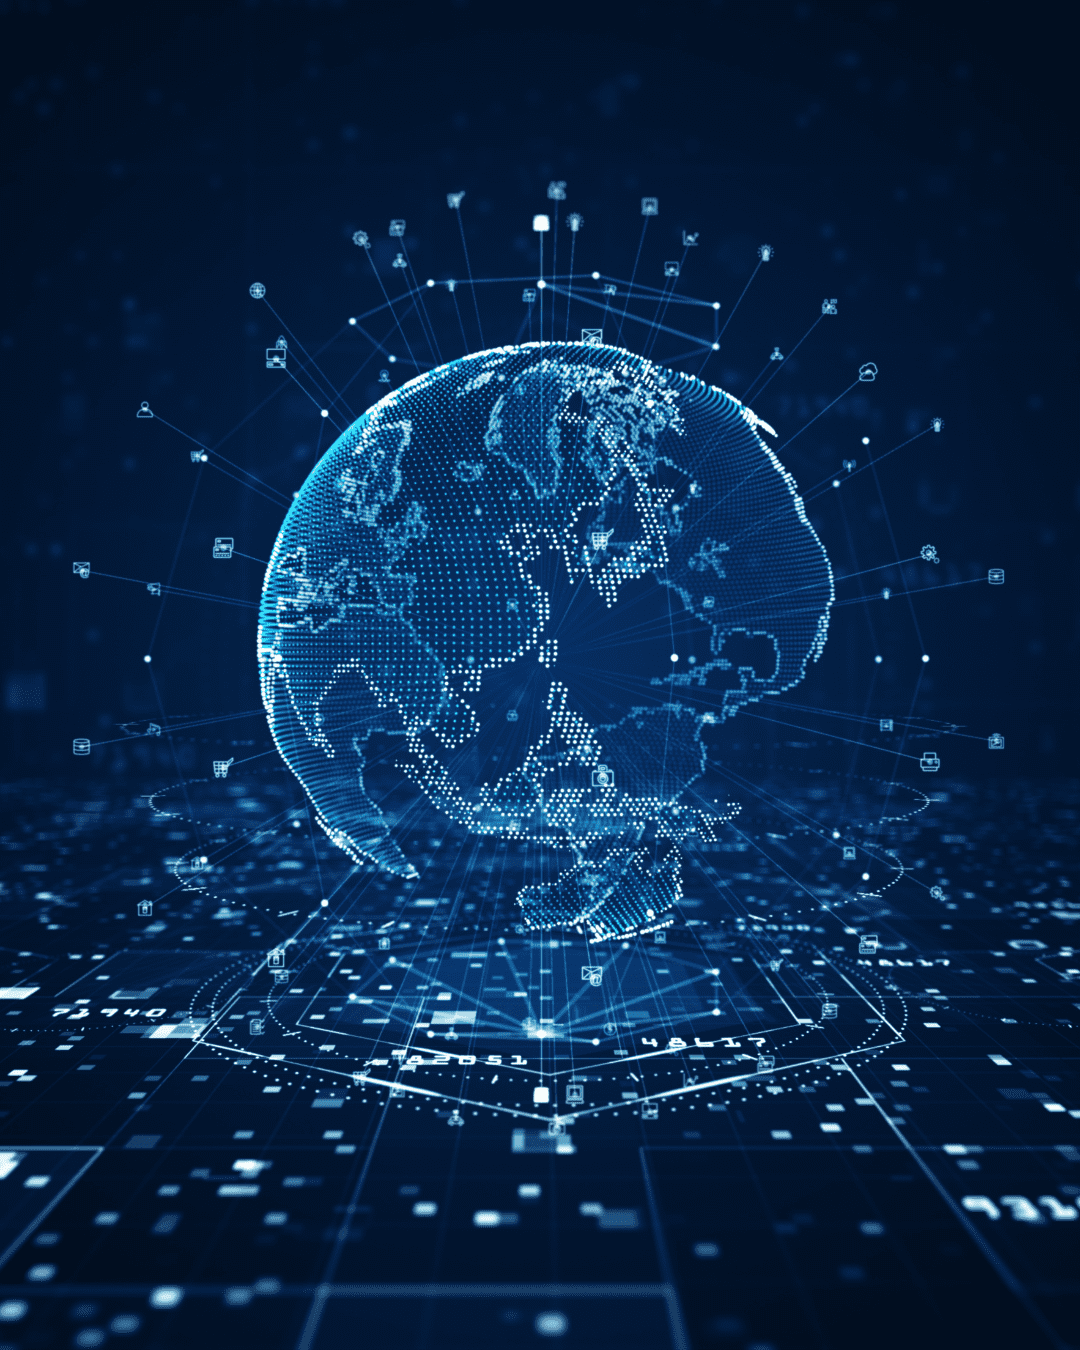 Trustack MSP Cyber Security, IT Services, IT Support. A digital rendering of a globe with a blue and white color scheme is depicted in a futuristic, grid-like space. The globe, akin to the connected landscapes of Lake District National Park, is surrounded by numerous interconnected lines and icons representing global network and data connectivity.